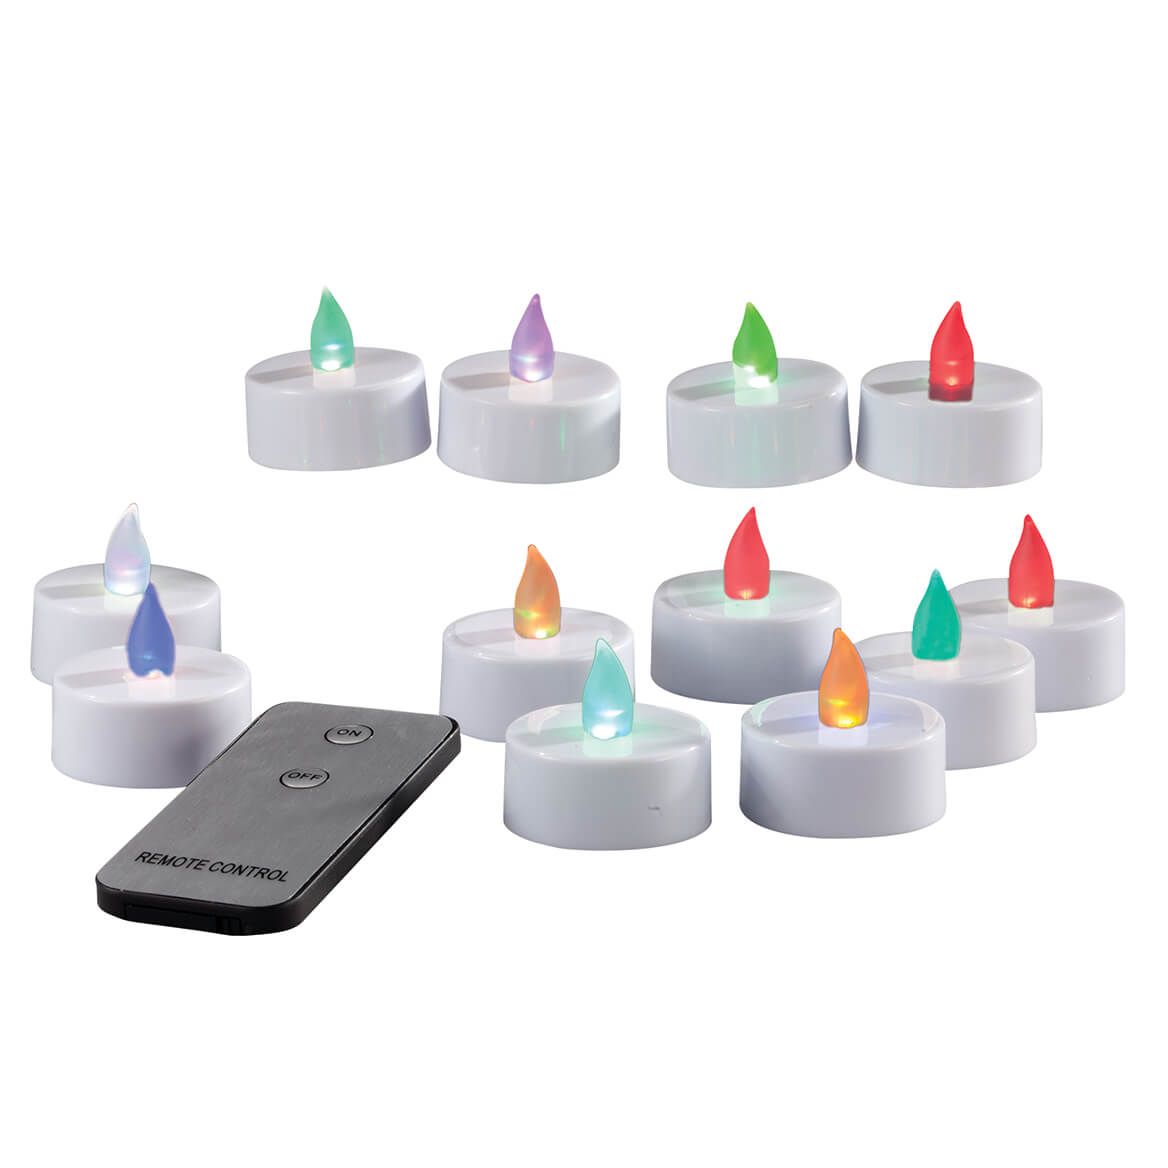 Tea Lights with Remote Control, Set of 12 + '-' + 364533